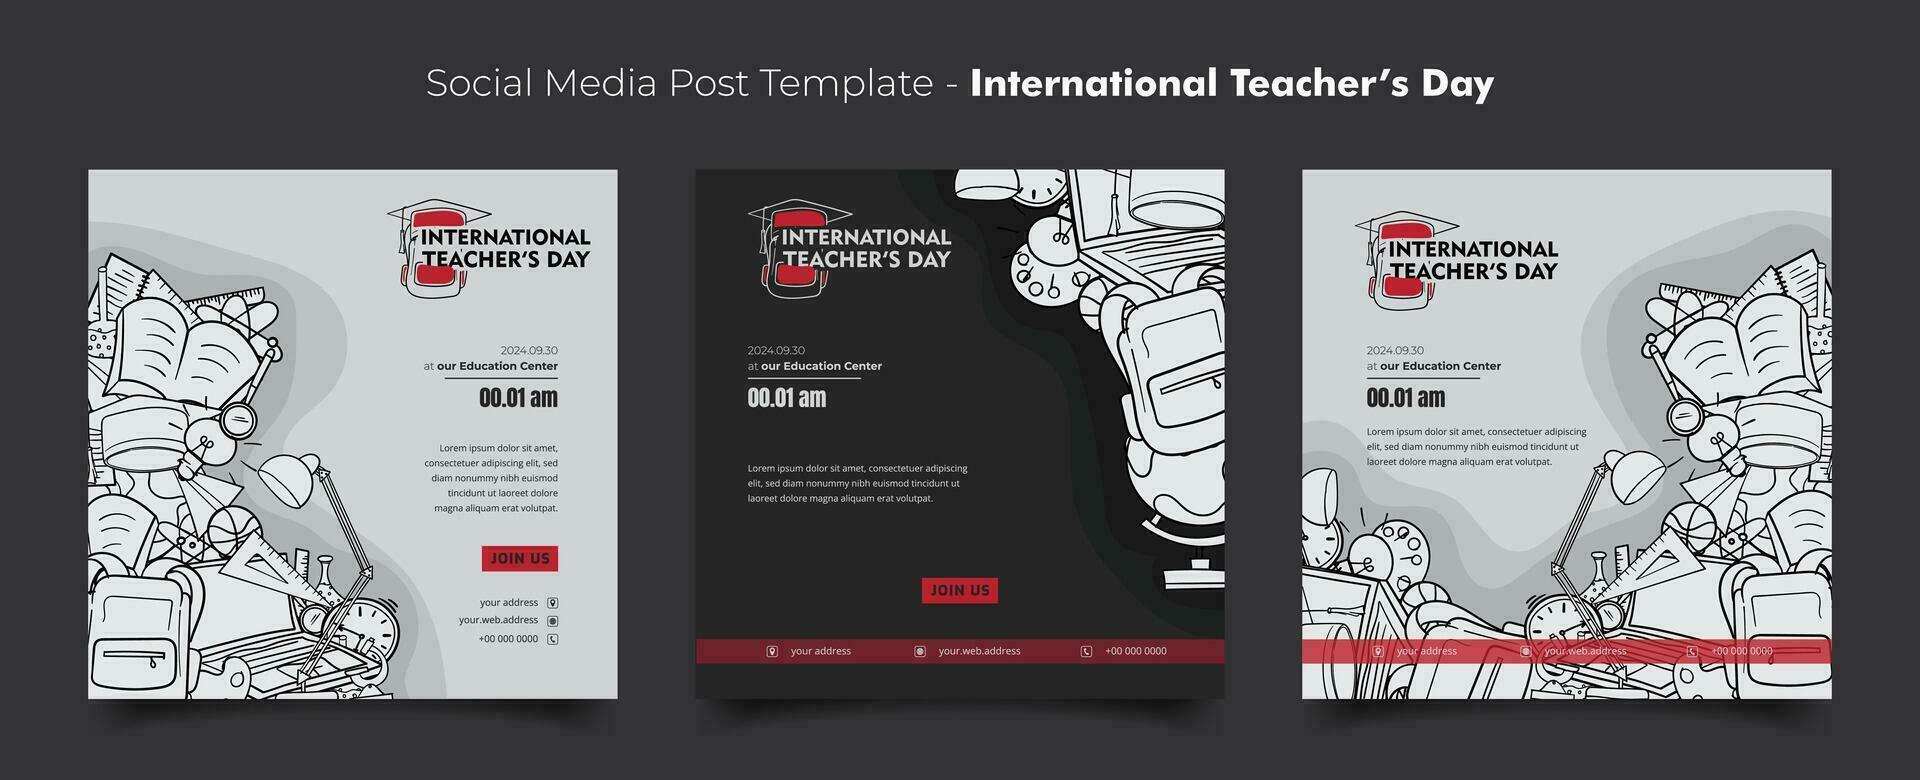 Social media post template with doodle art of learning tools design for world teacher's day campaign vector